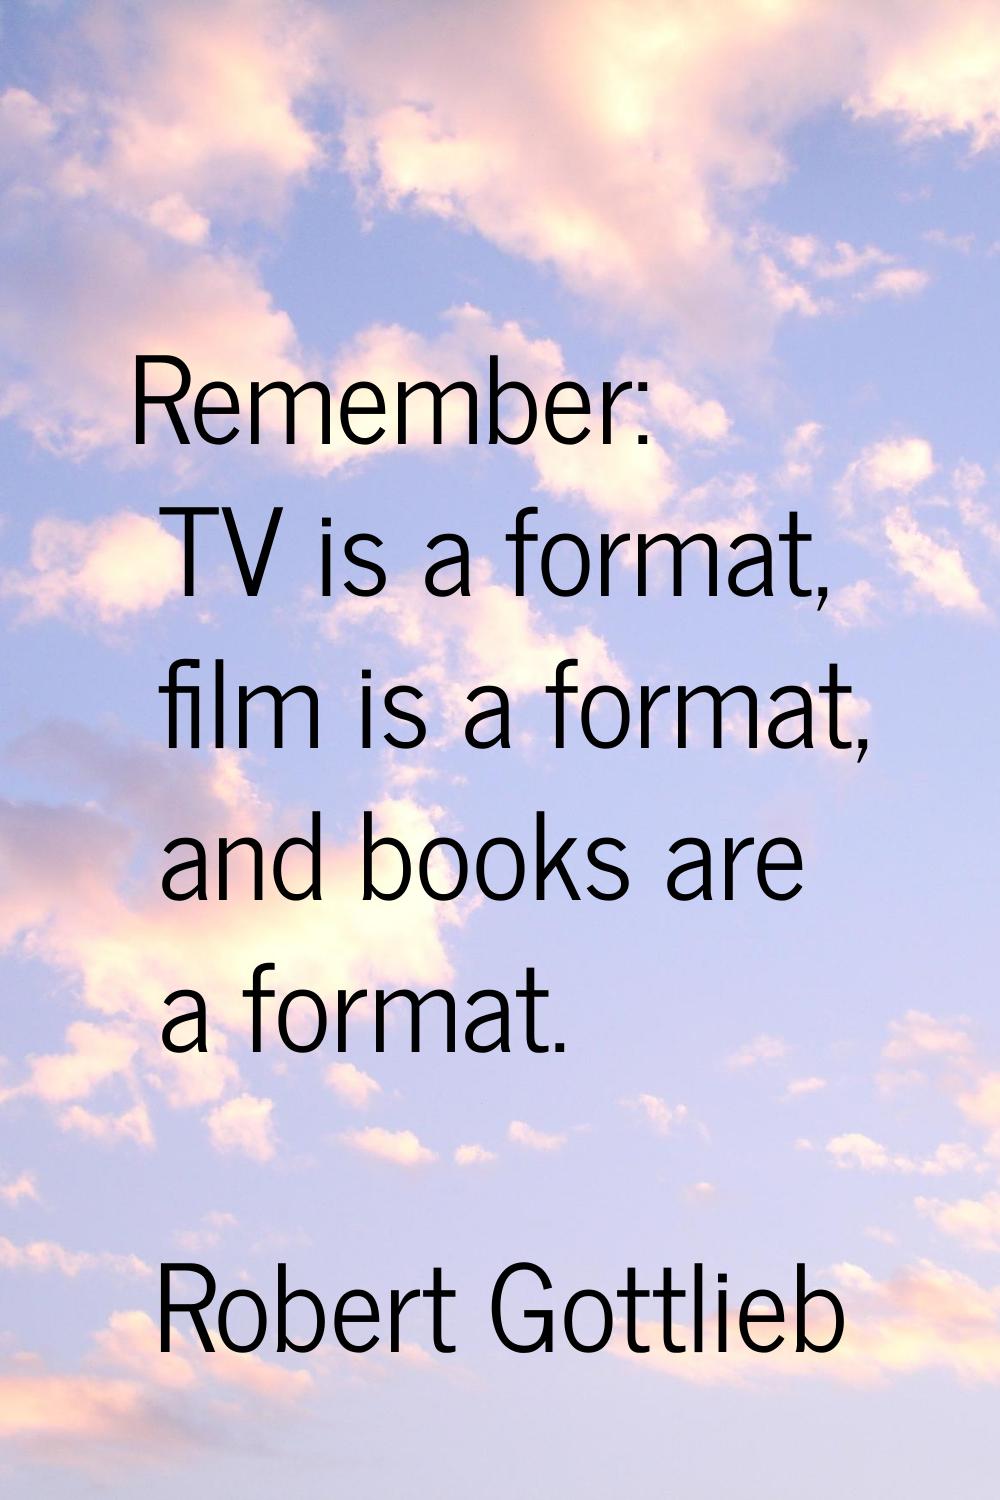 Remember: TV is a format, film is a format, and books are a format.